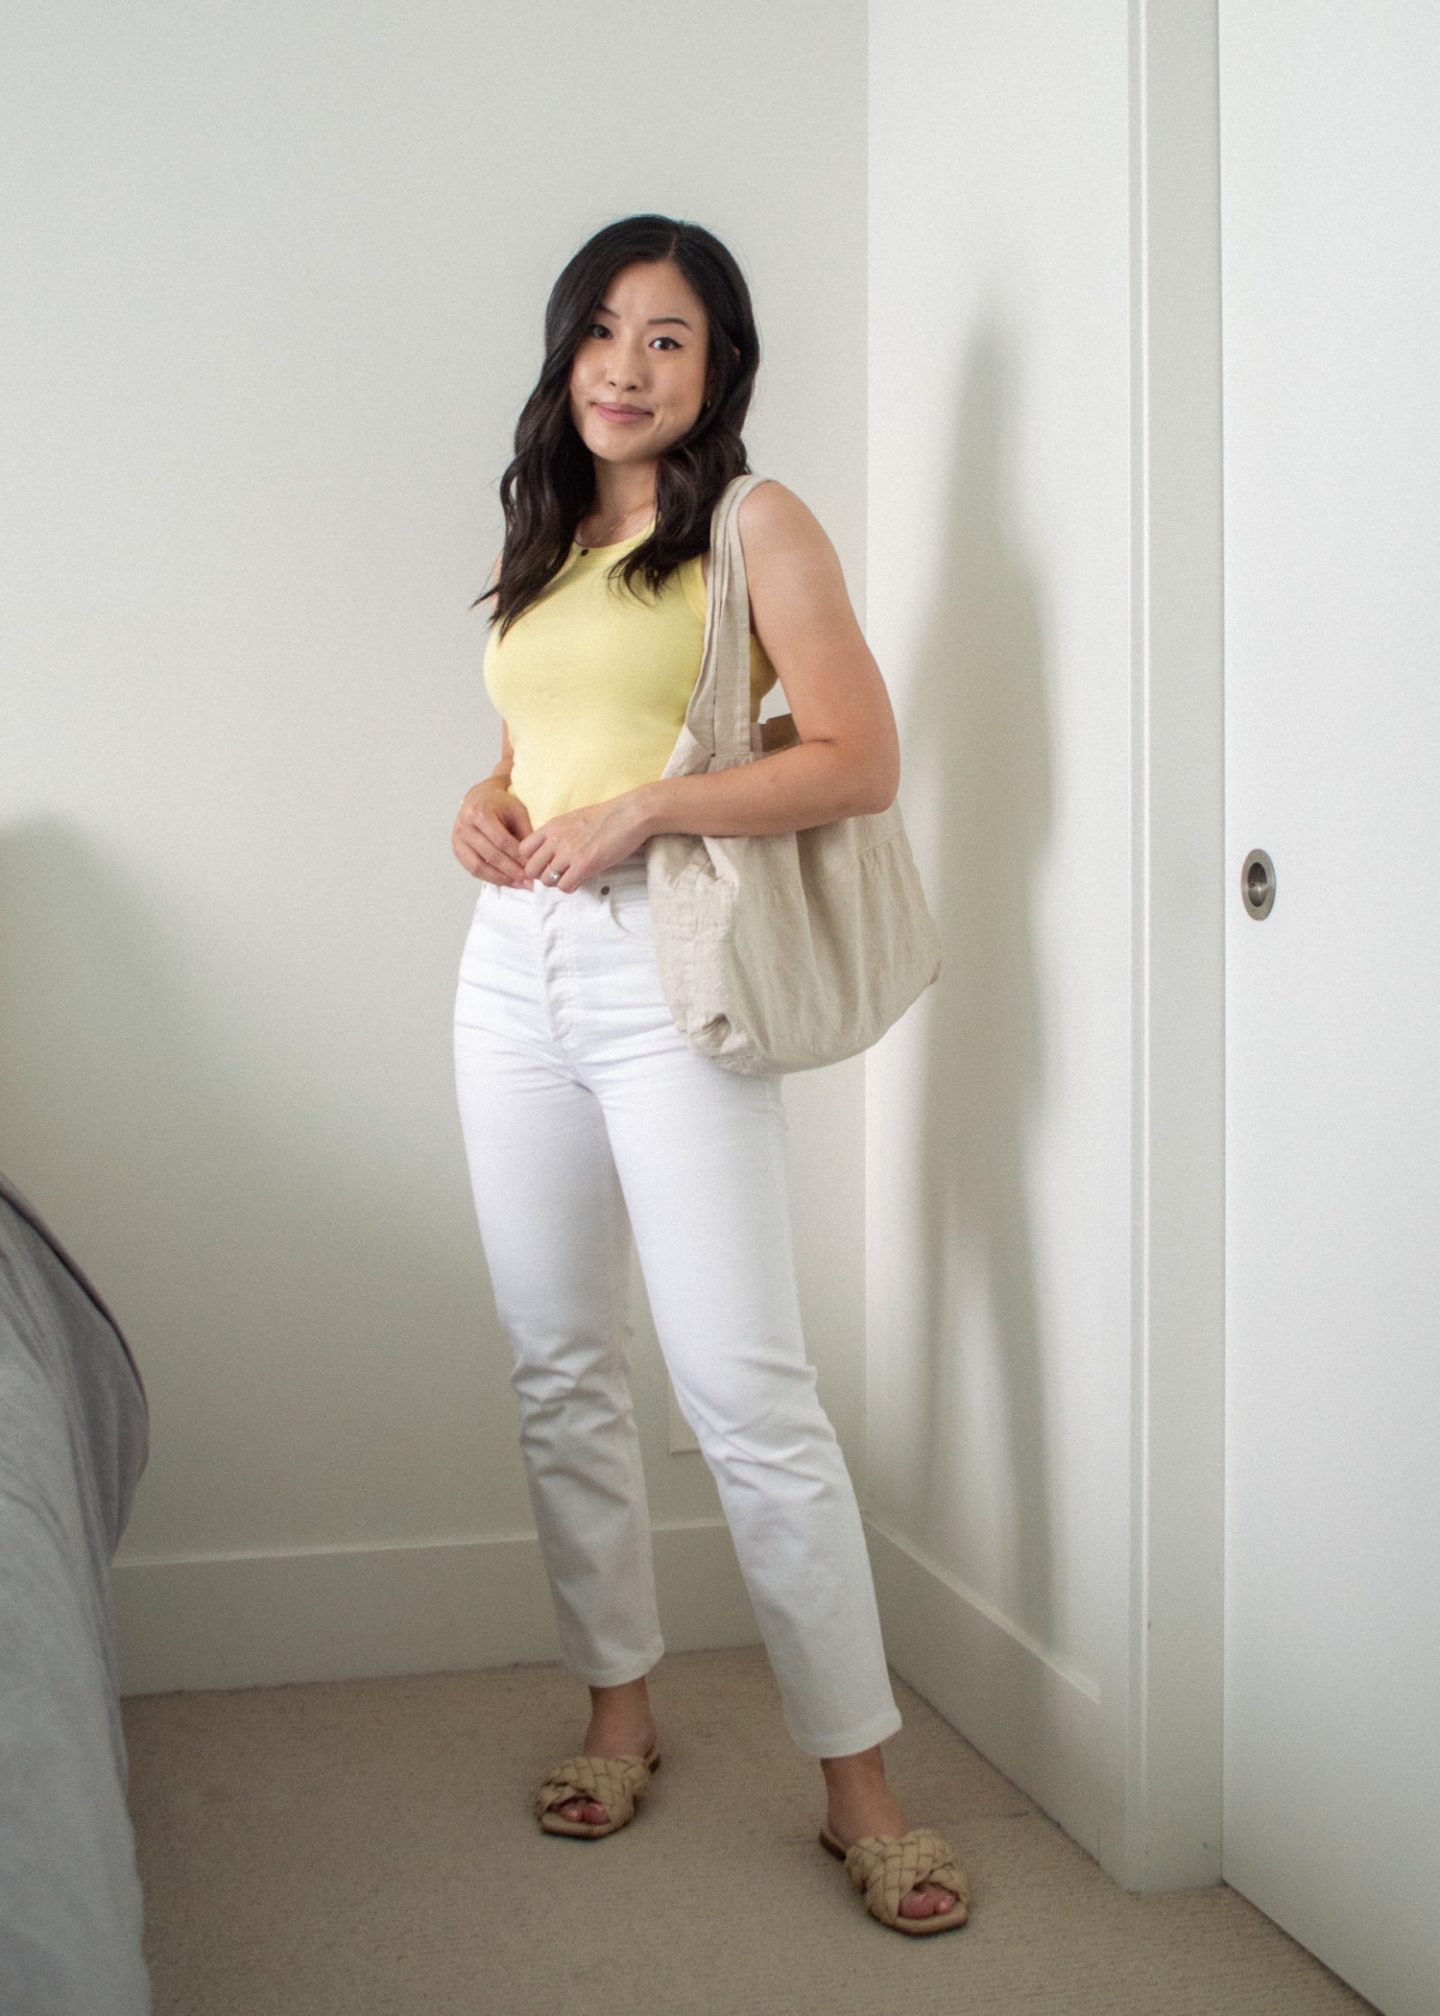 Her Simple Sole - Outfit details - Frank and Oak Good Cotton Tee in Yellow, Denim Forum Arlo Jeans in White, L'intervalle Miriel Beige Leather sandals, Harly Jae Zero Waste Tote